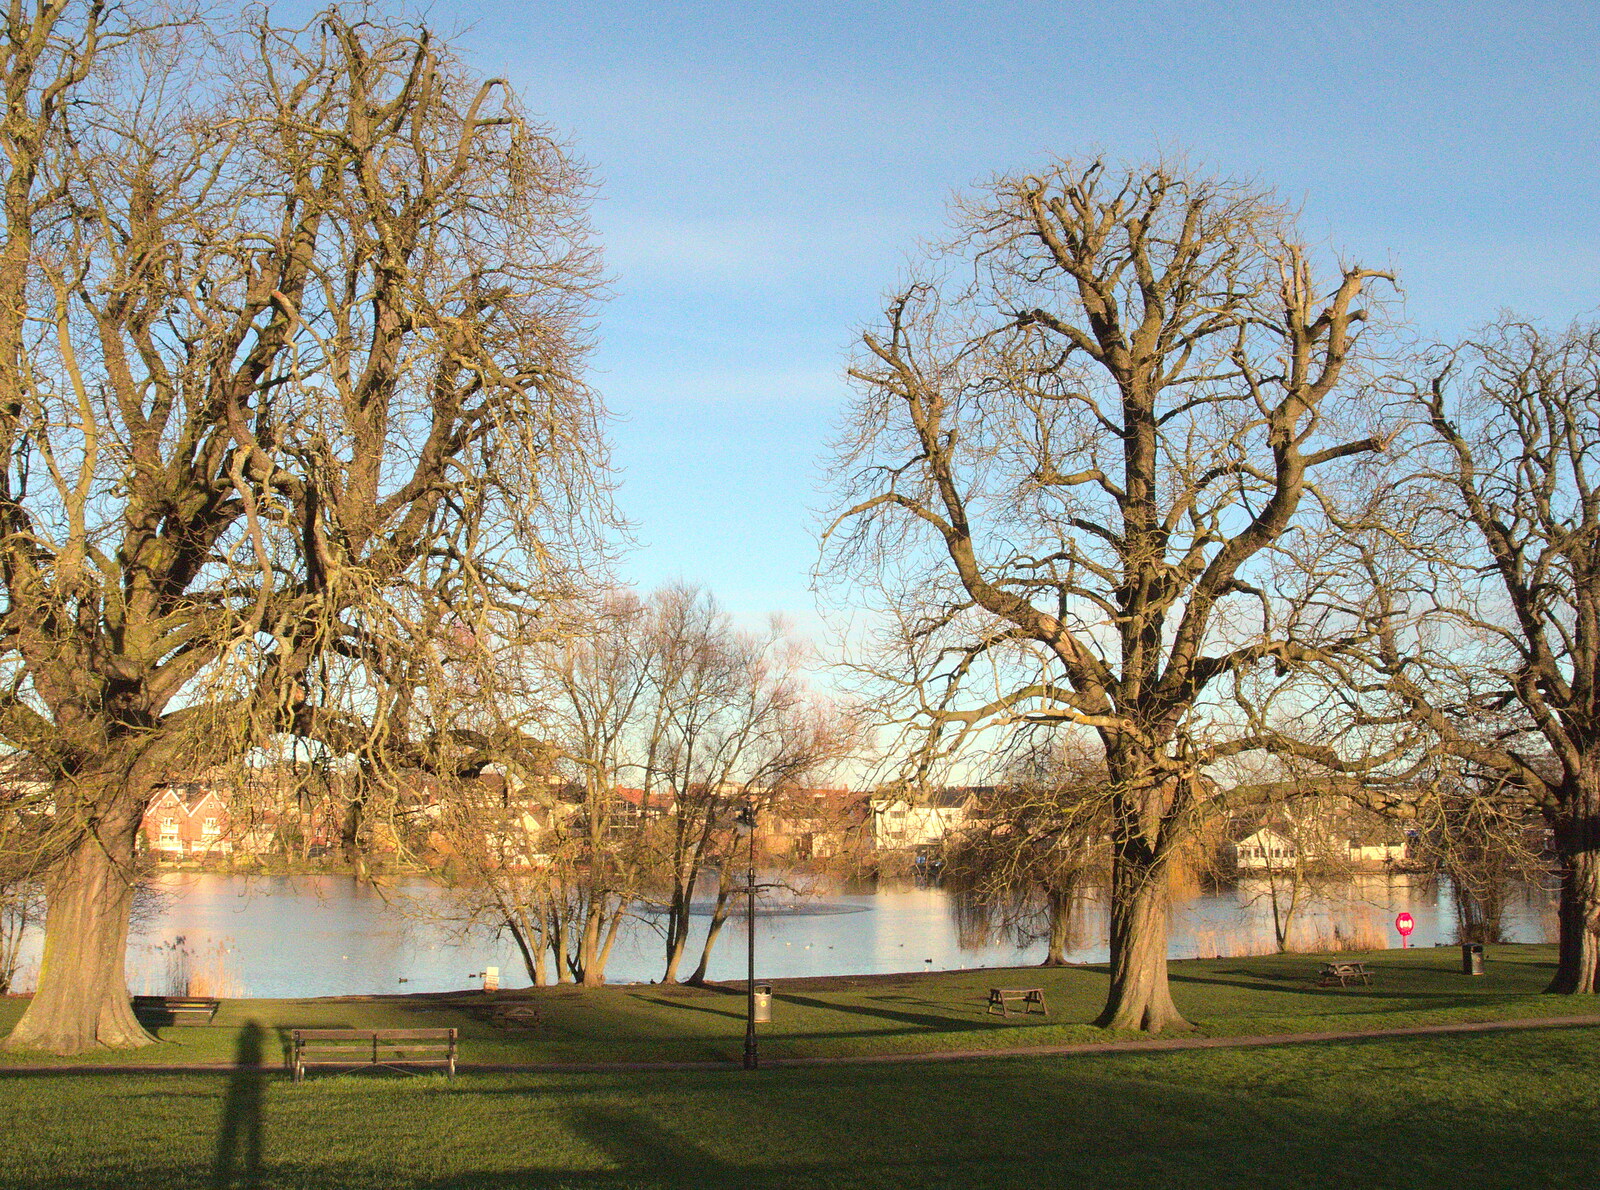 Bare trees by the Mere from Ten-Pin Bowling, Riverside, Norwich - 3rd January 2016